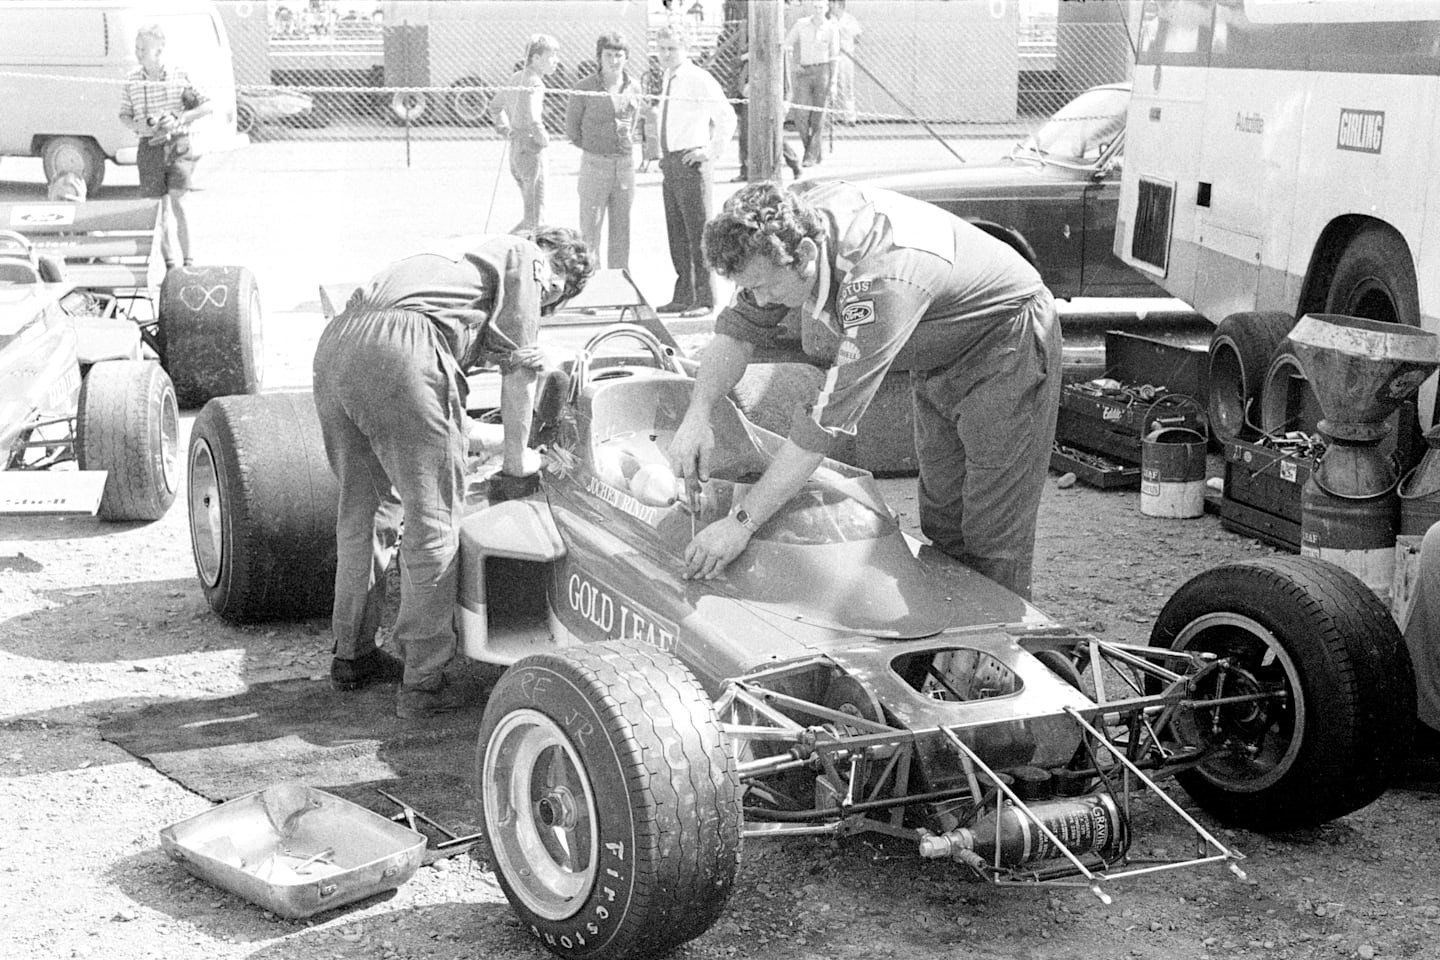 The Lotus 72 only went and conked out again at Jochen Rindt's home race. 